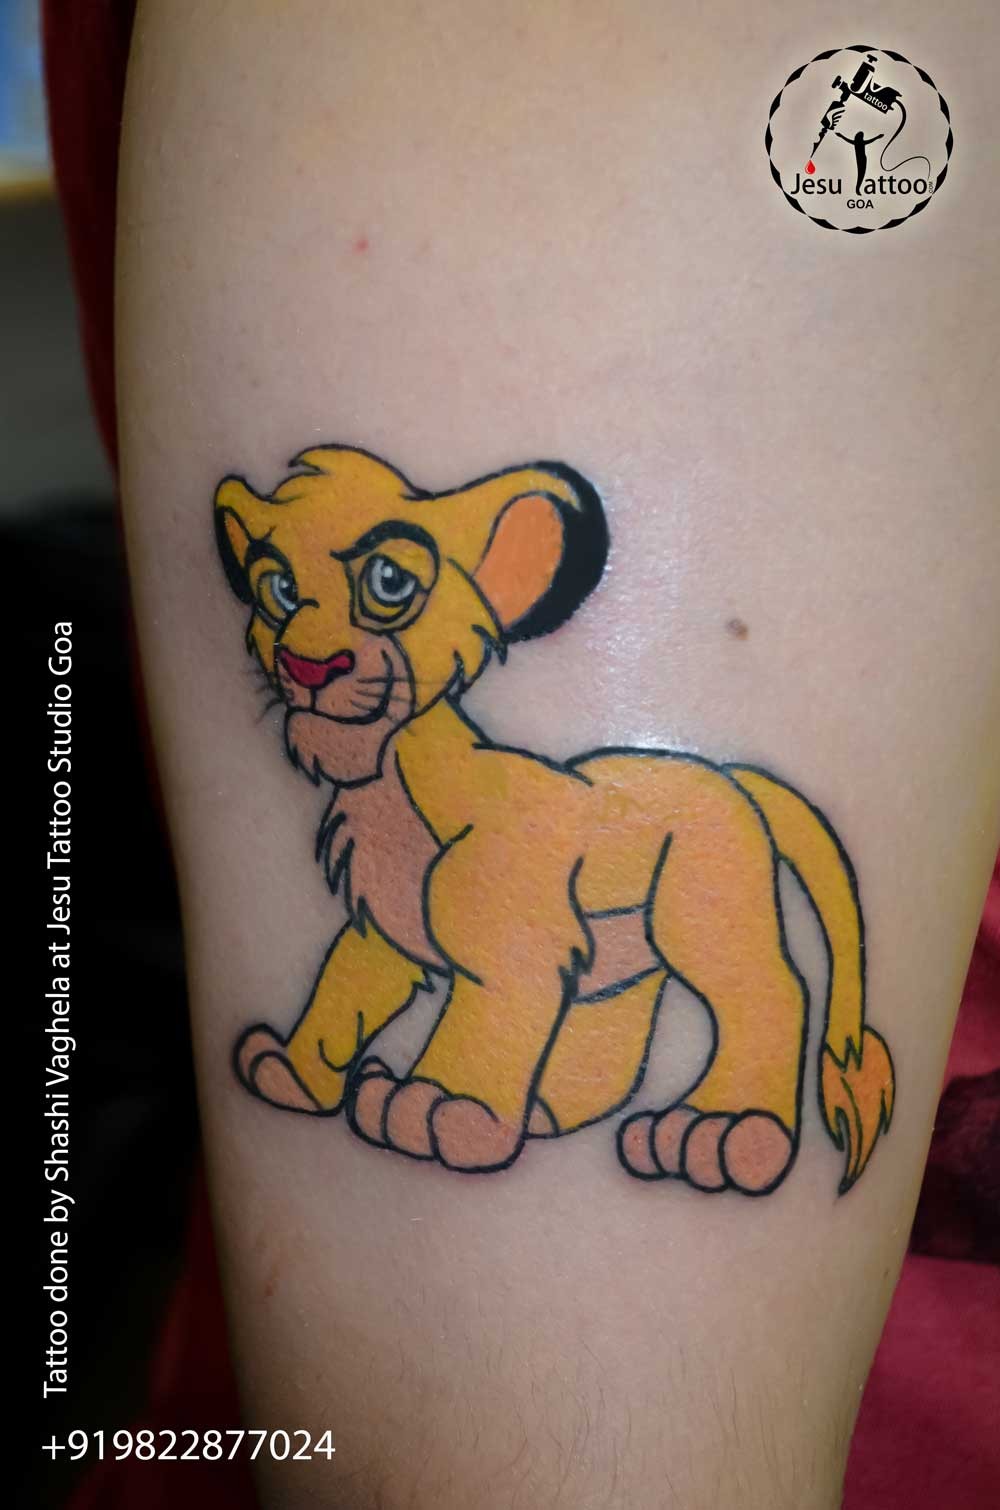 Lion King tattoo located on the bicep.